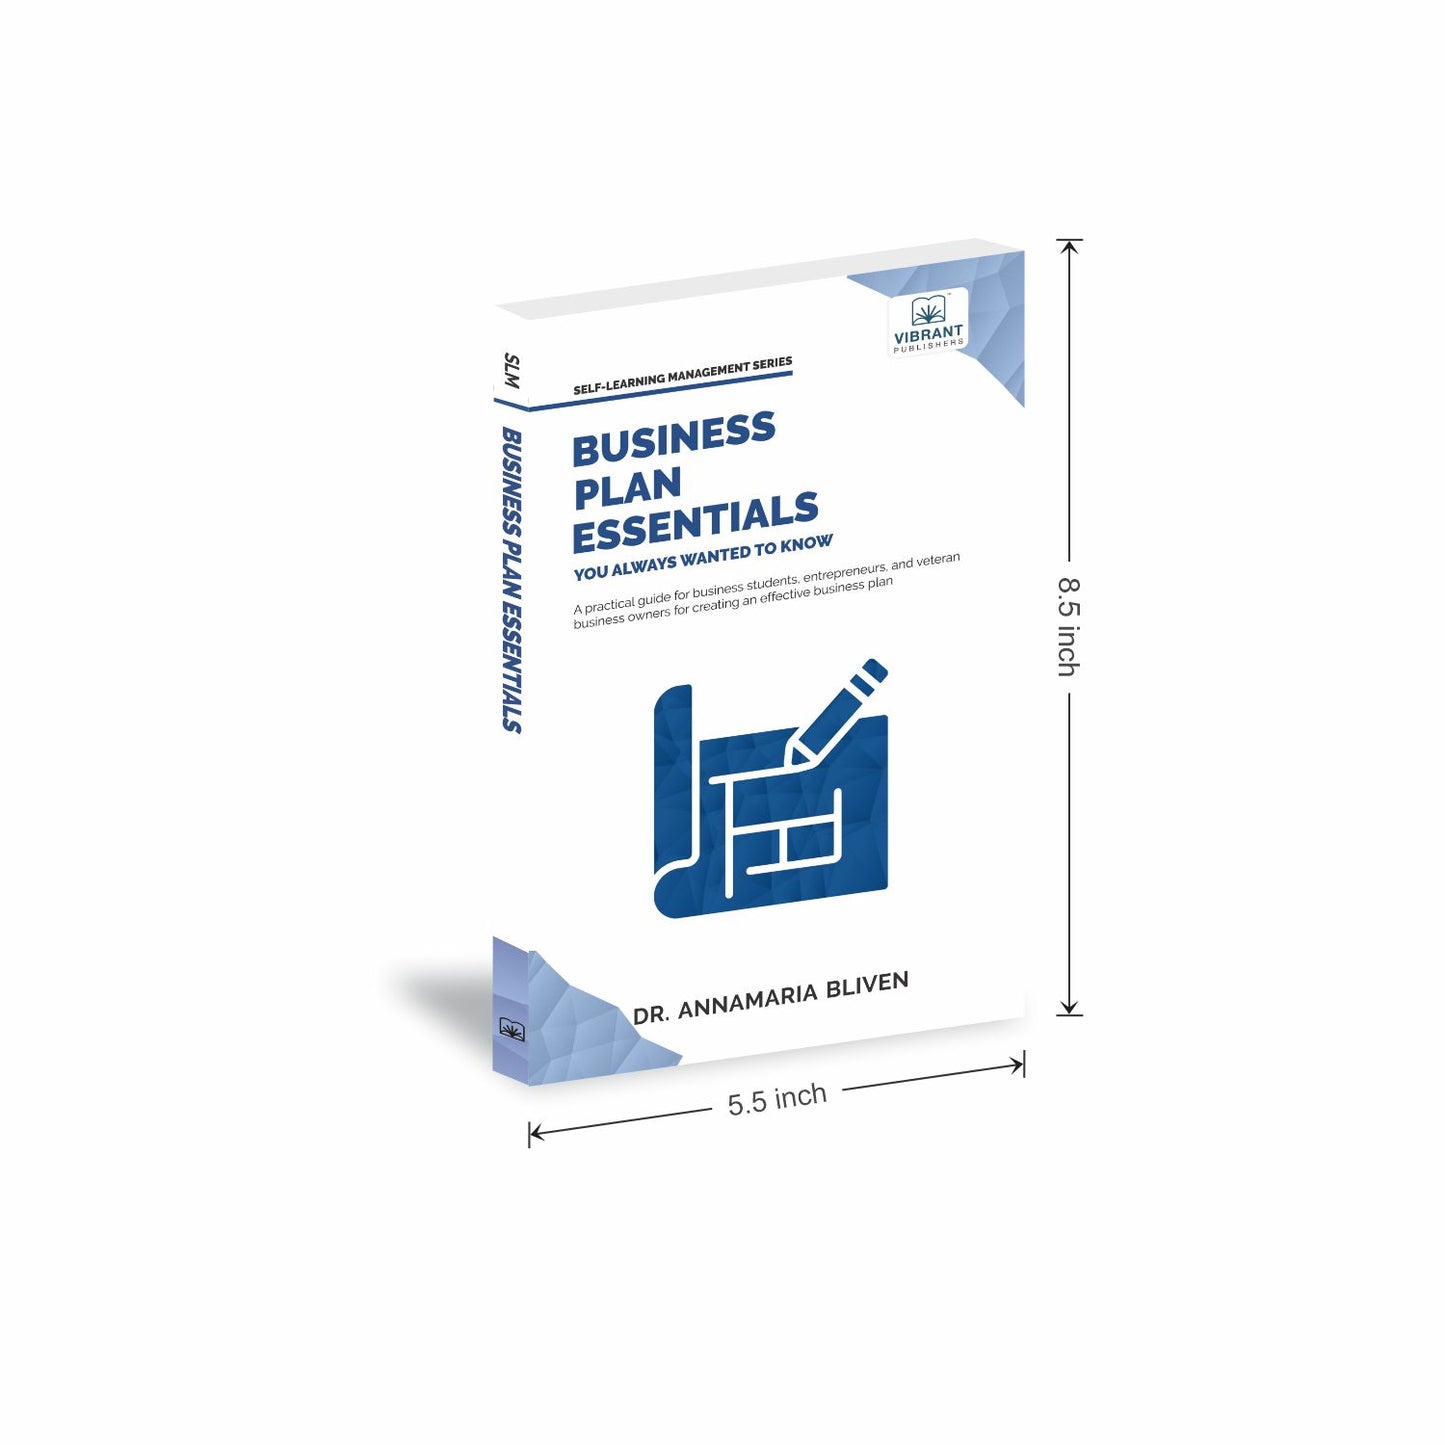 Entrepreneur Essentials for Business Planning and Implementing Effective Strategies